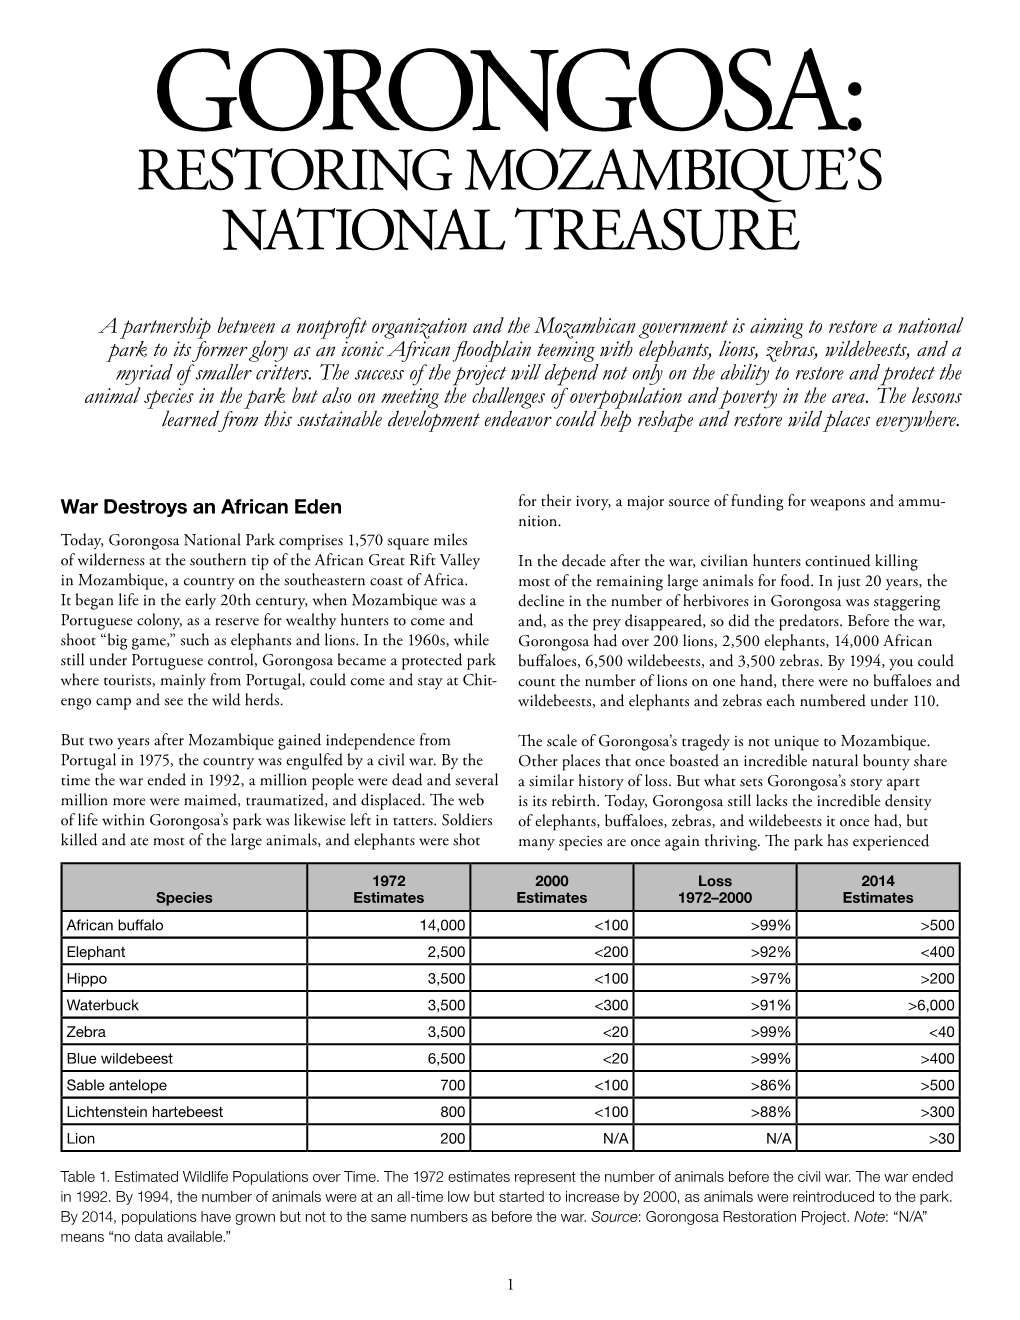 Read a Handout About the Restoration of Gorongosa National Park That Will